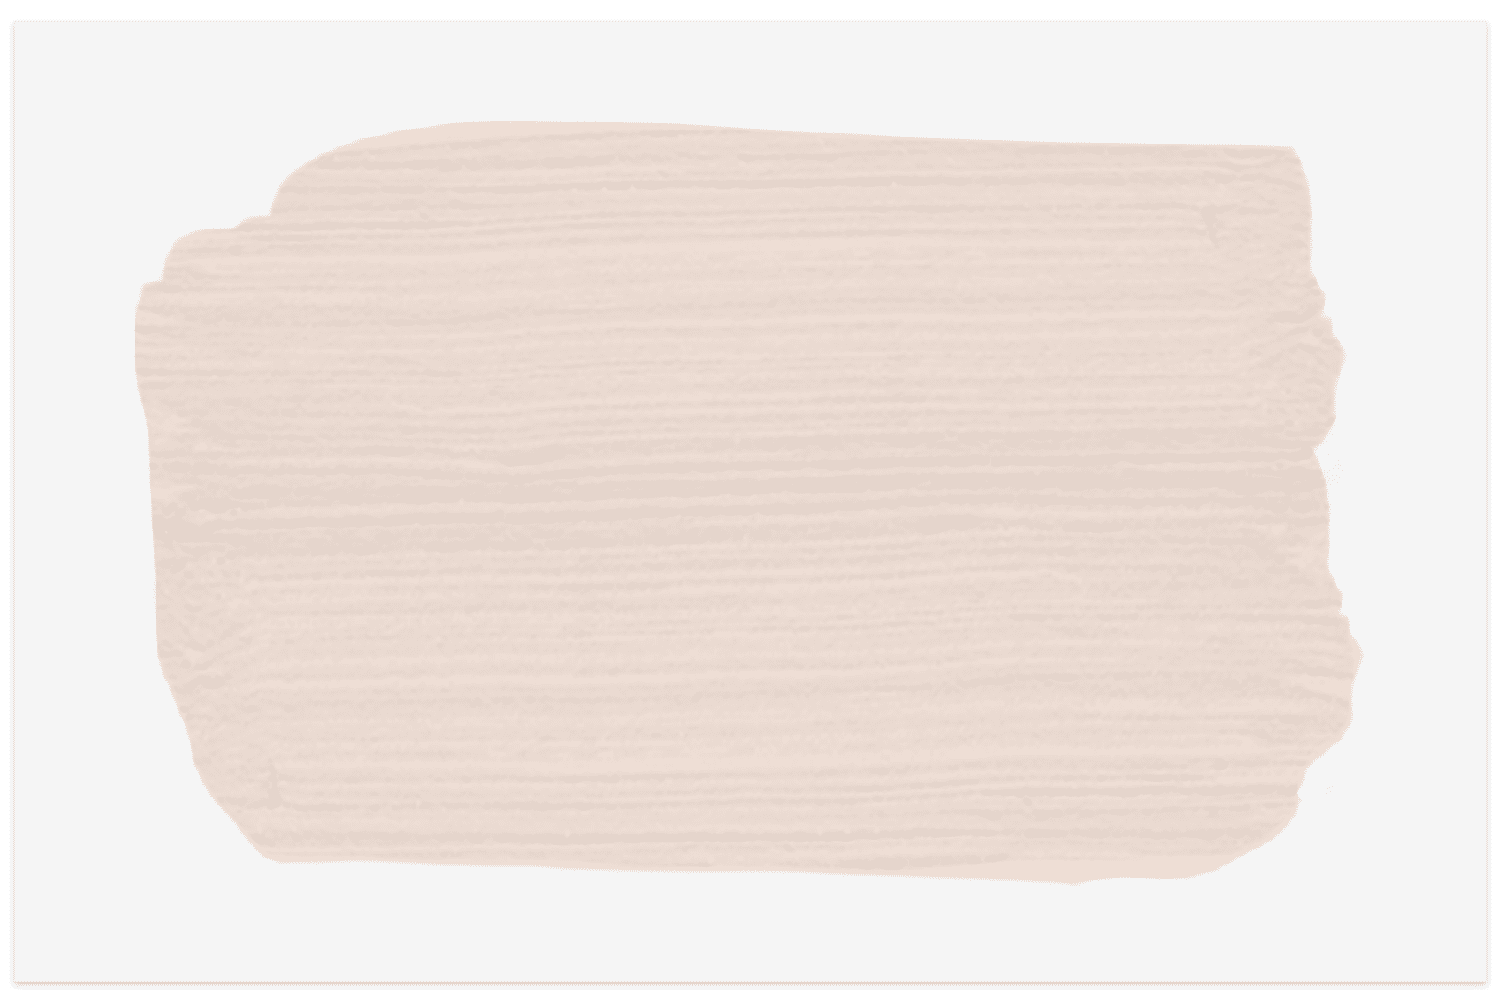 Sherwin-Williams Faint Coral swatch